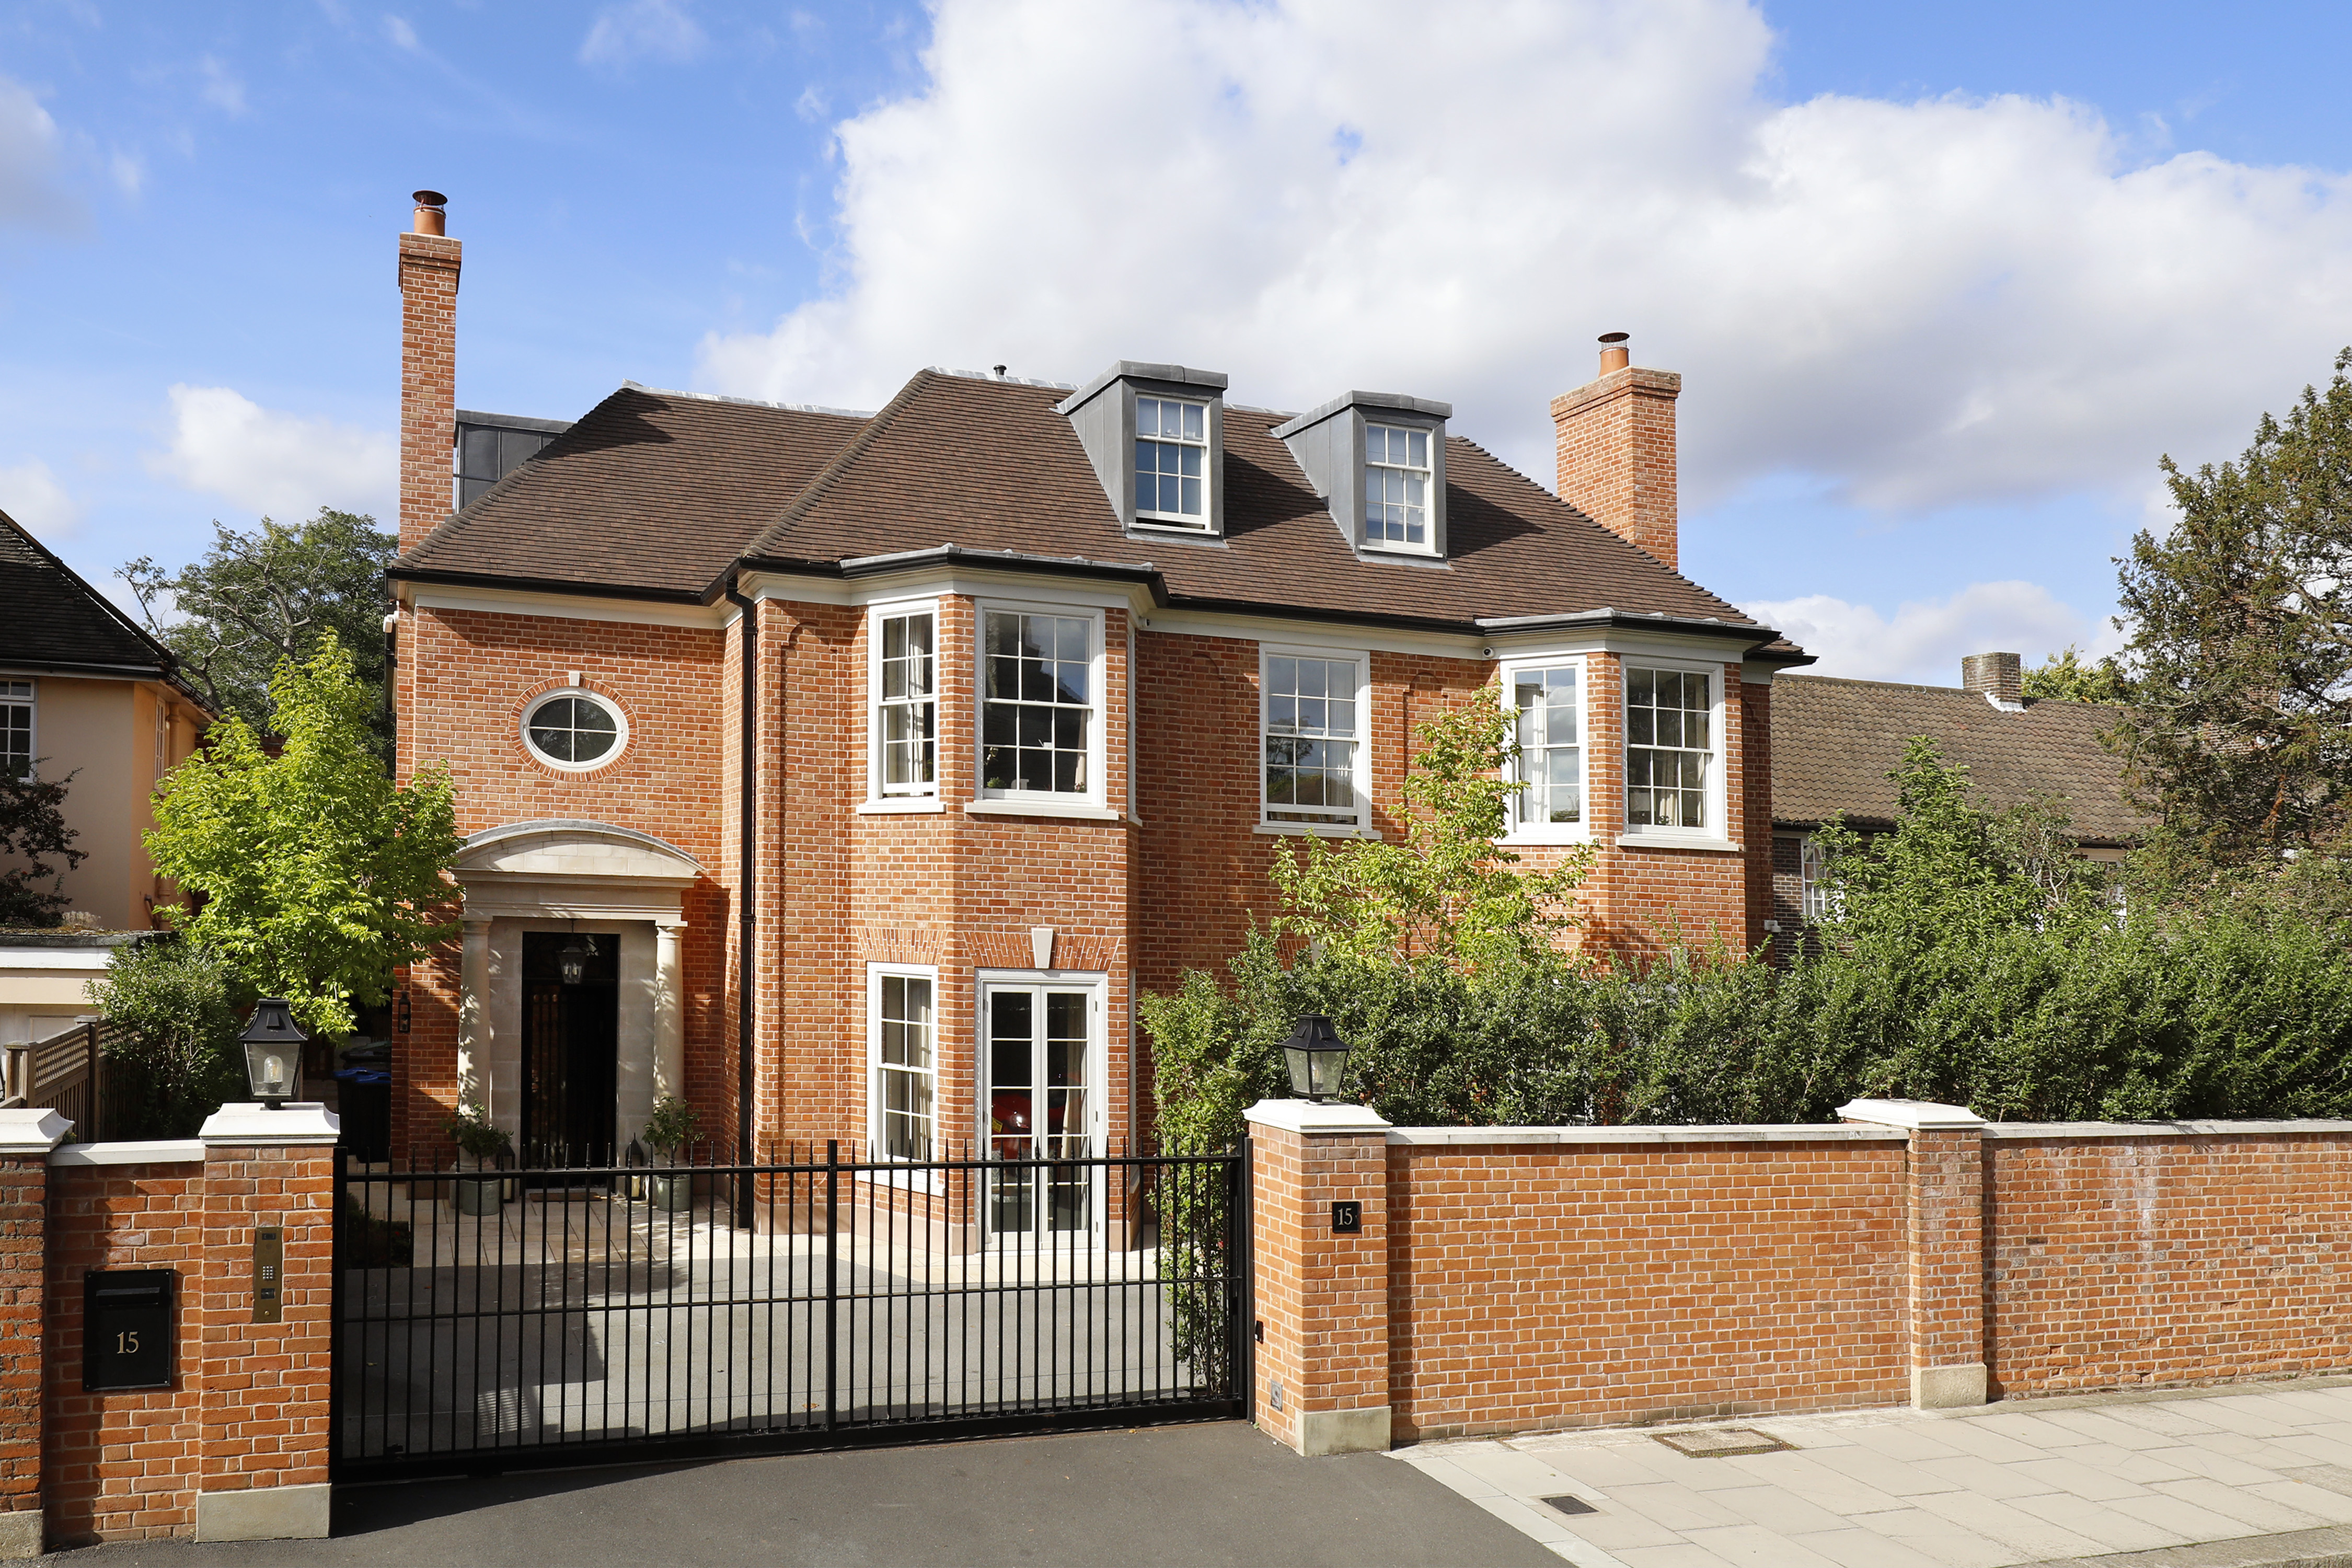 Newly built, detached residence with large garden in prime Wimbledon location.